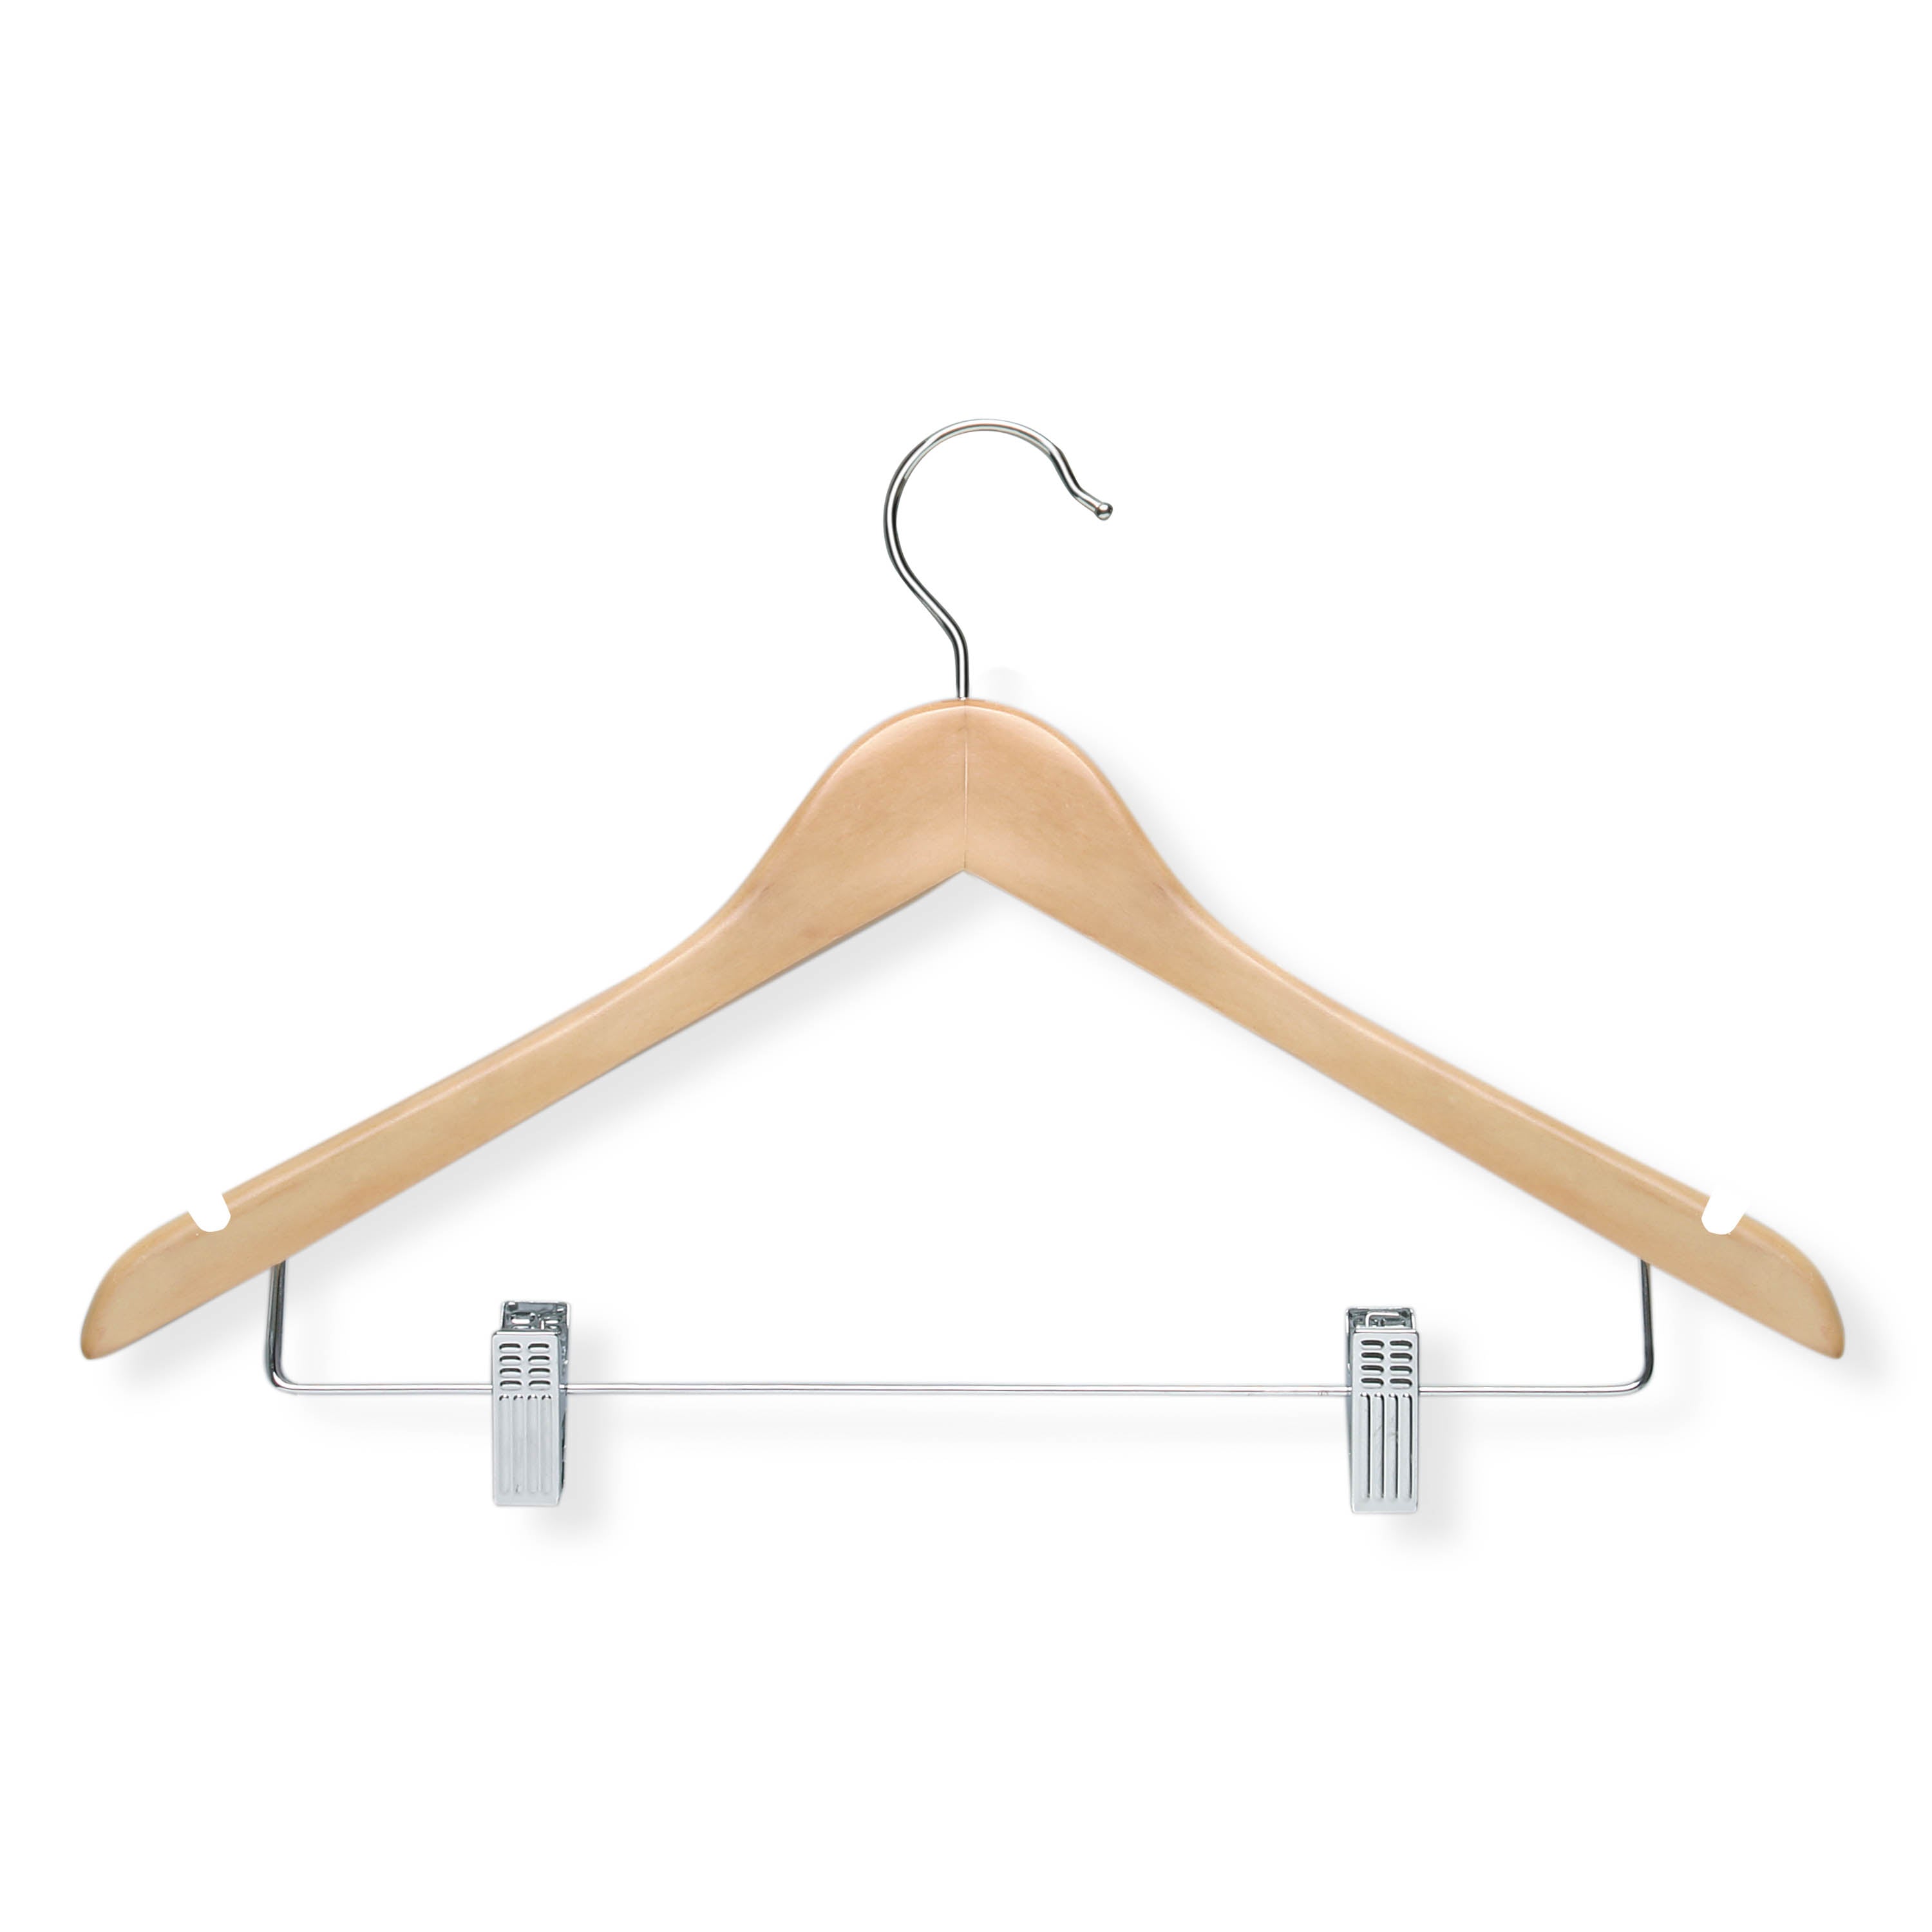 Traditional Hanger Clothes Hangers for sale